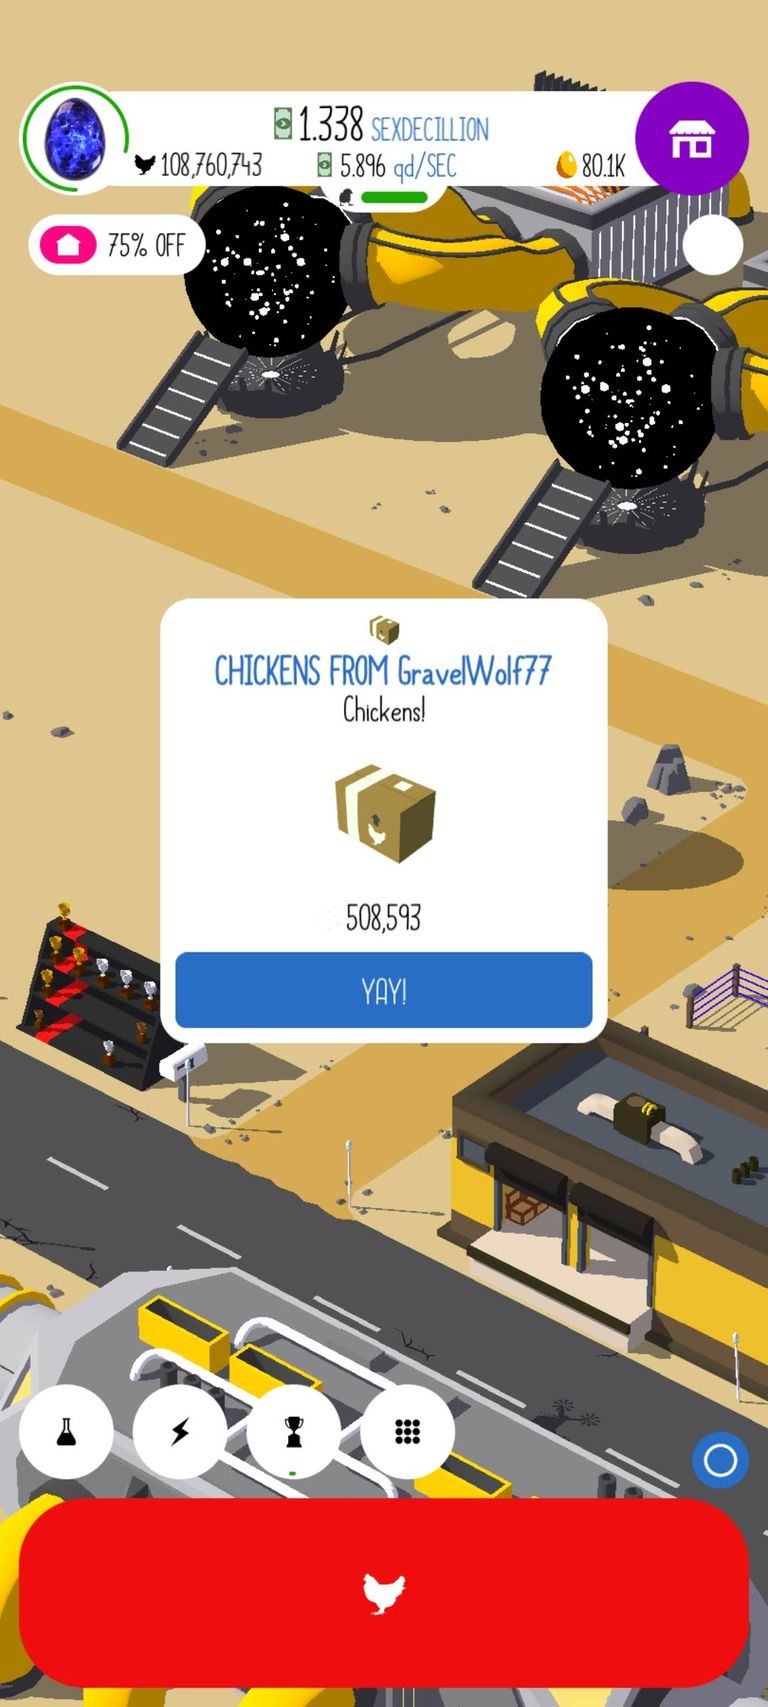 Egg Inc Bug: Gifts are still there after the contract is completed